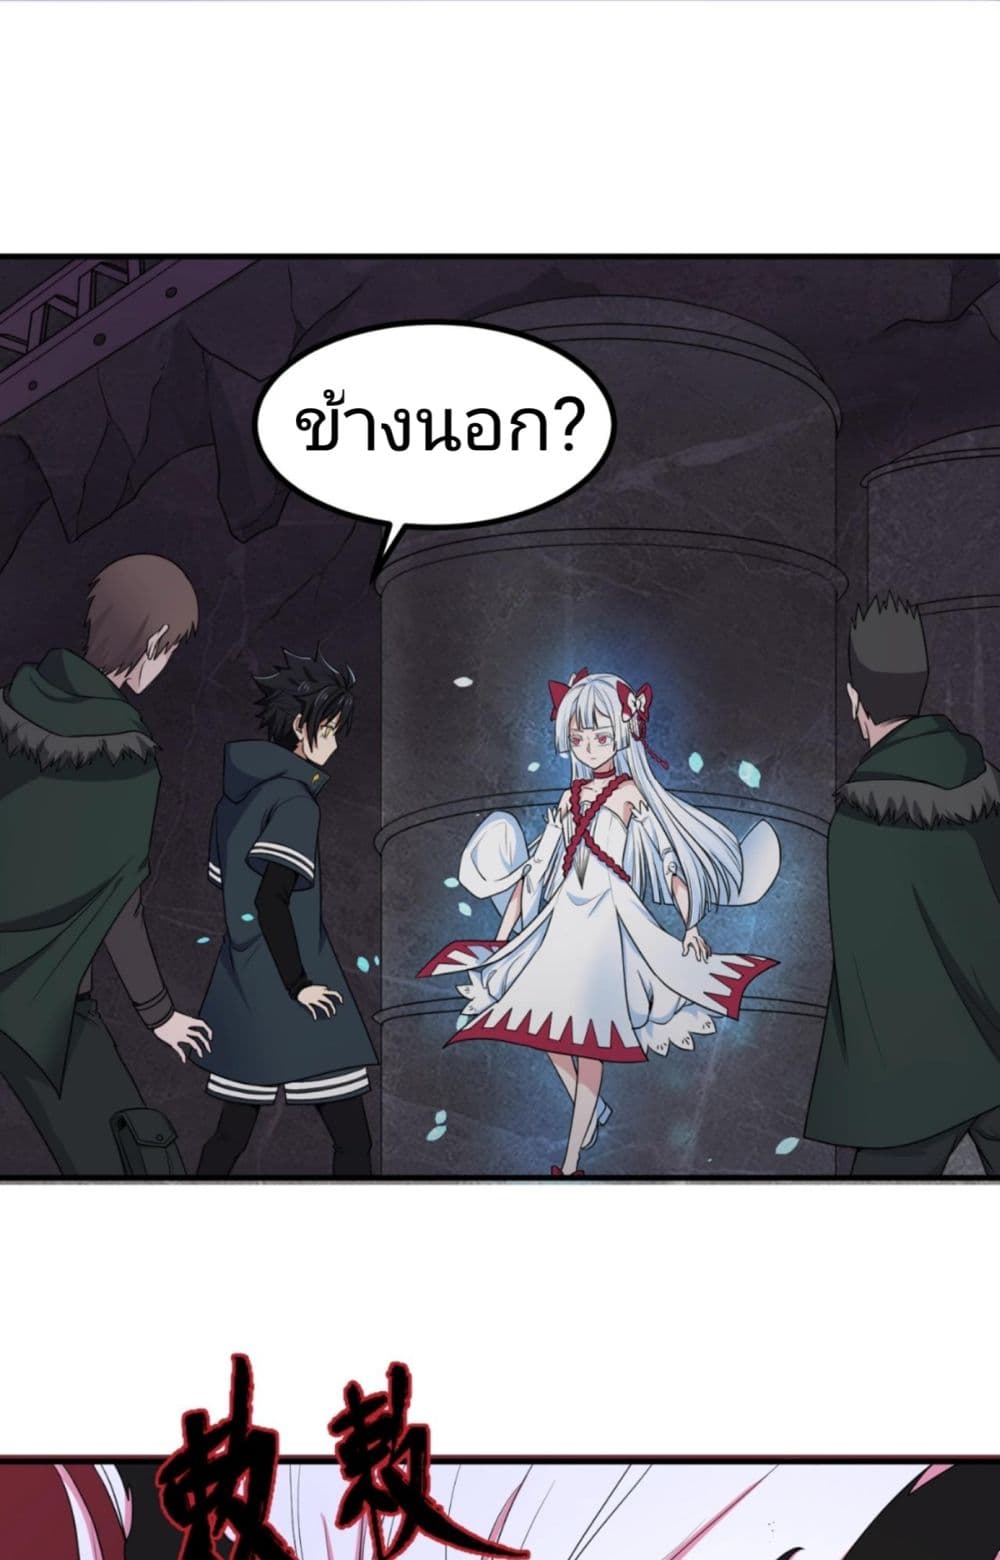 The Age of Ghost Spirits à¸à¸­à¸à¸à¸µà¹ 6 (42)